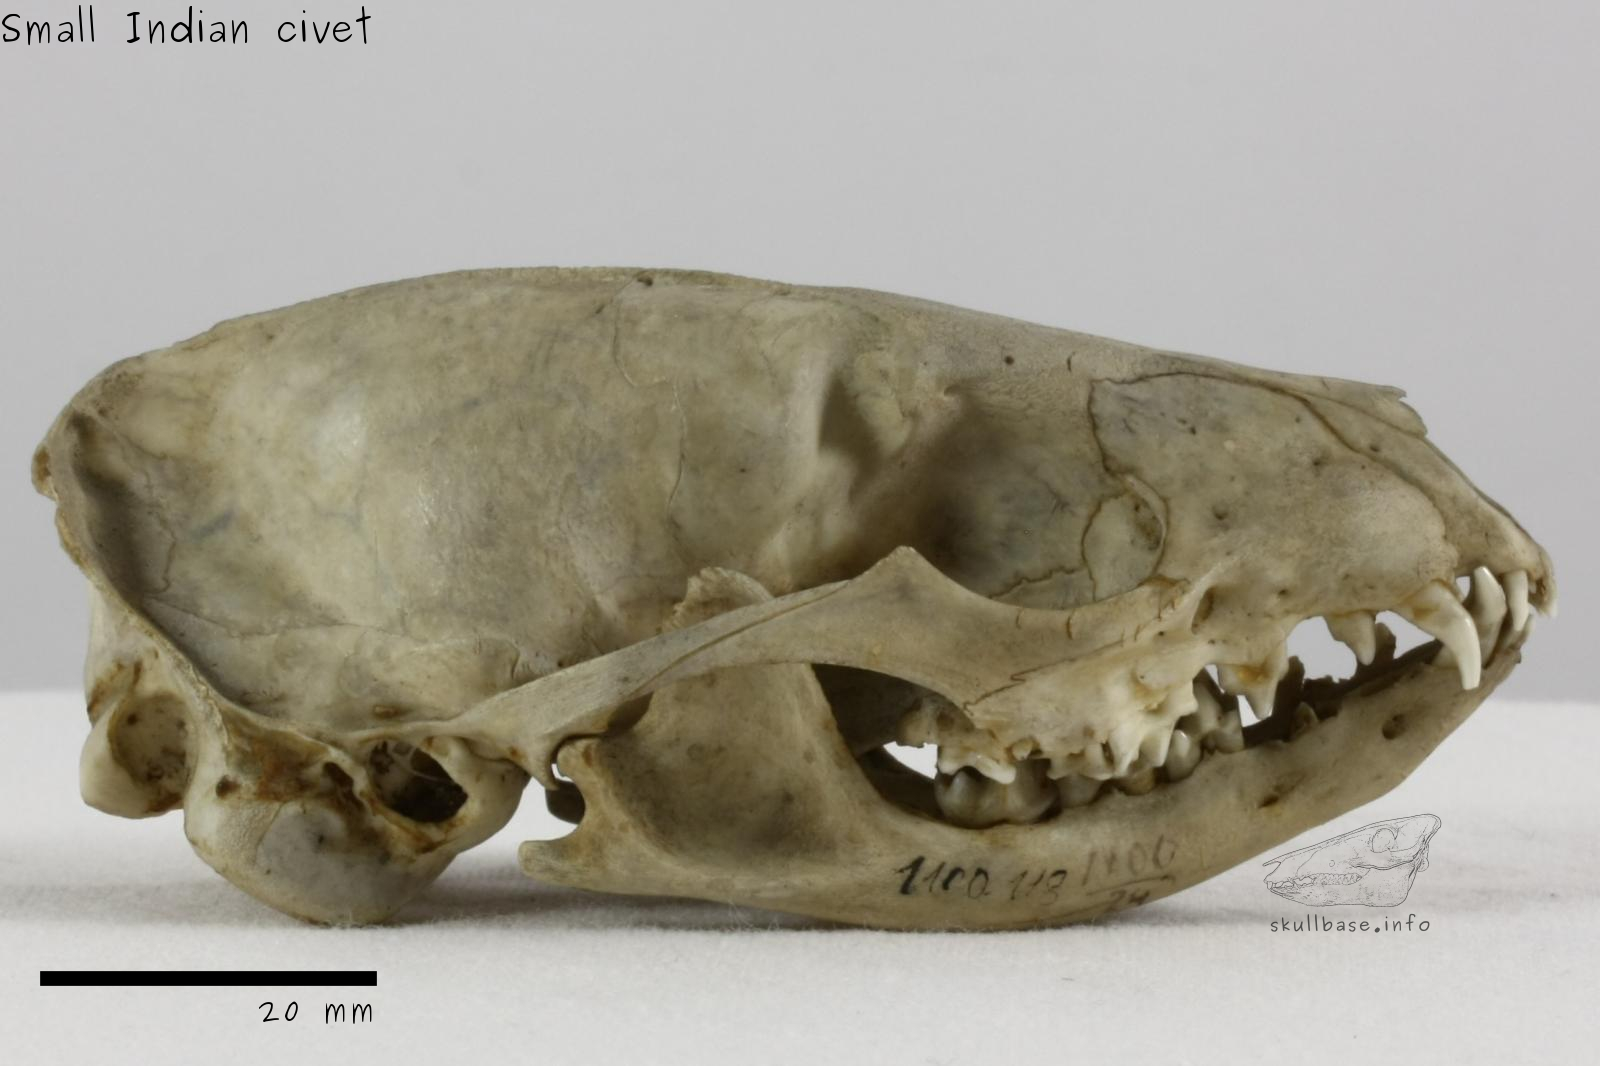 Small Indian civet (Viverricula indica) skull lateral view